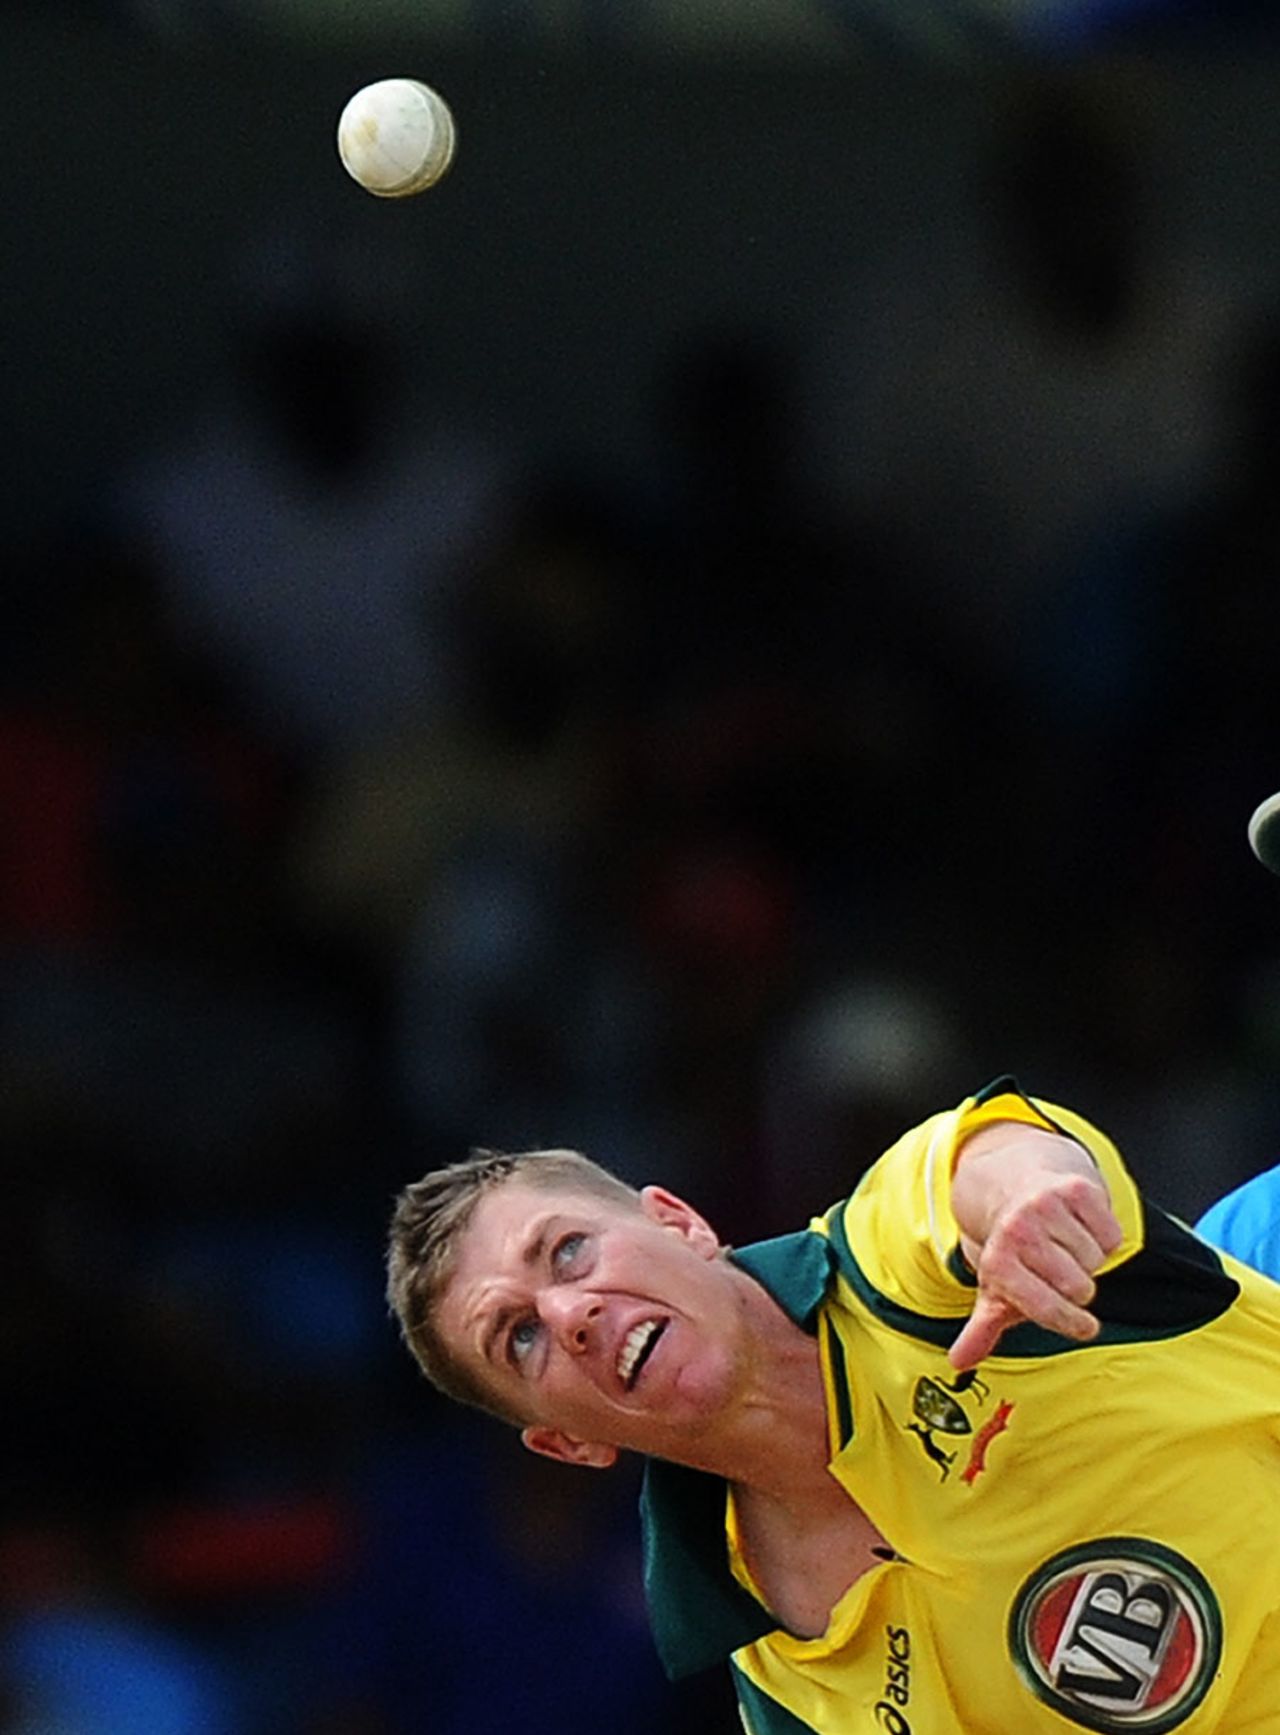 Xavier Doherty took four wickets in the match, West Indies v Australia, 1st ODI, St Vincent, March 16, 2012